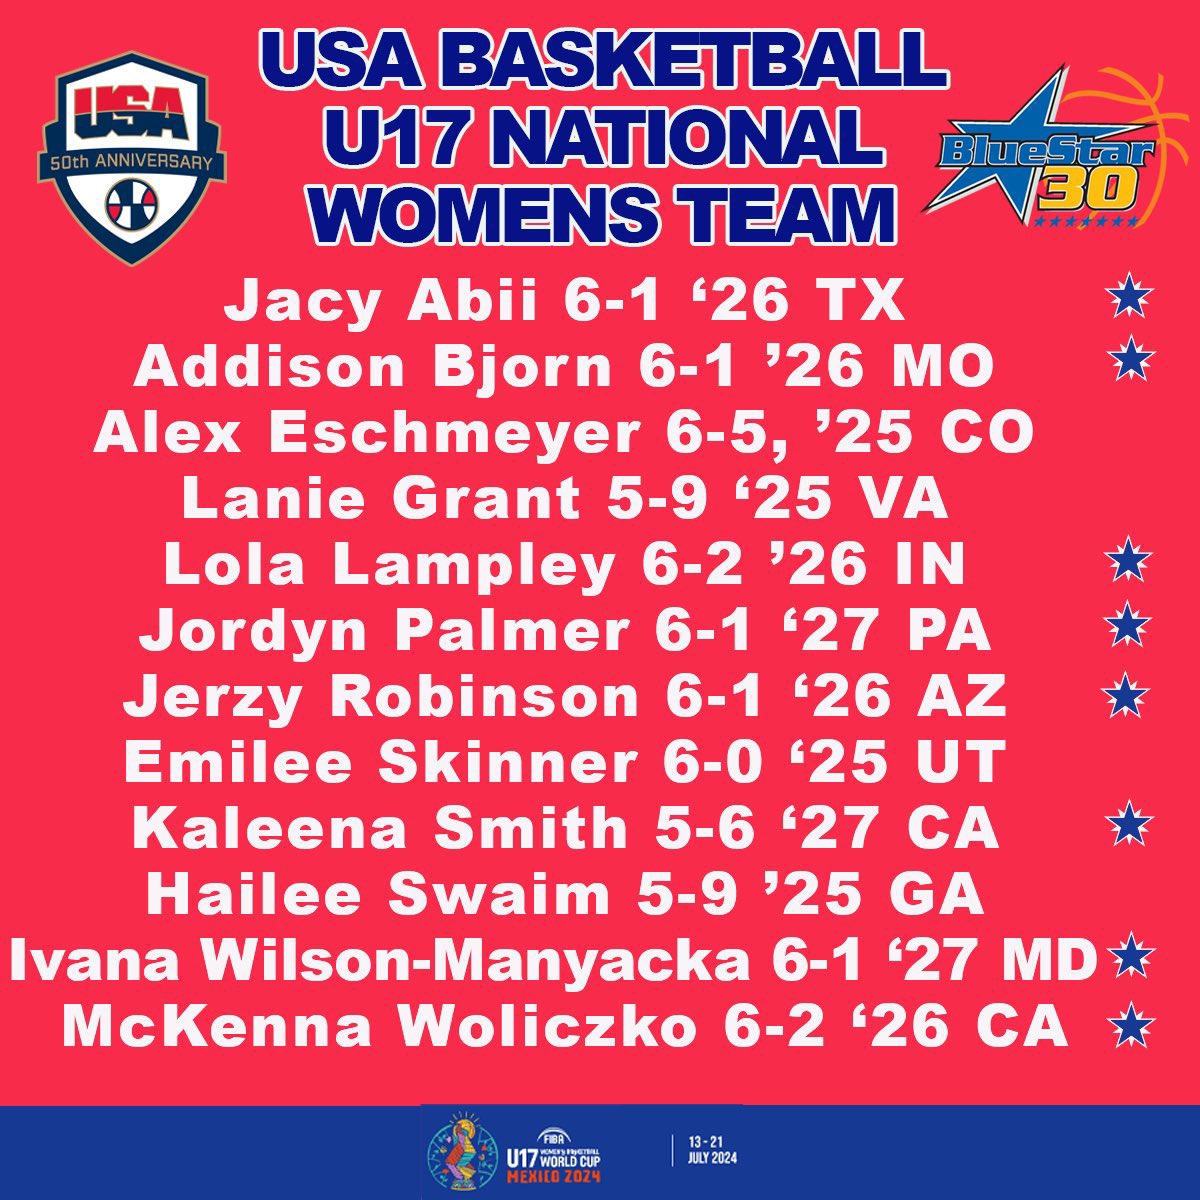 Congrats to all of these young ladies, and shoutout to our 8 30s who made the squad! Let’s get another 🥇🇺🇸🏀